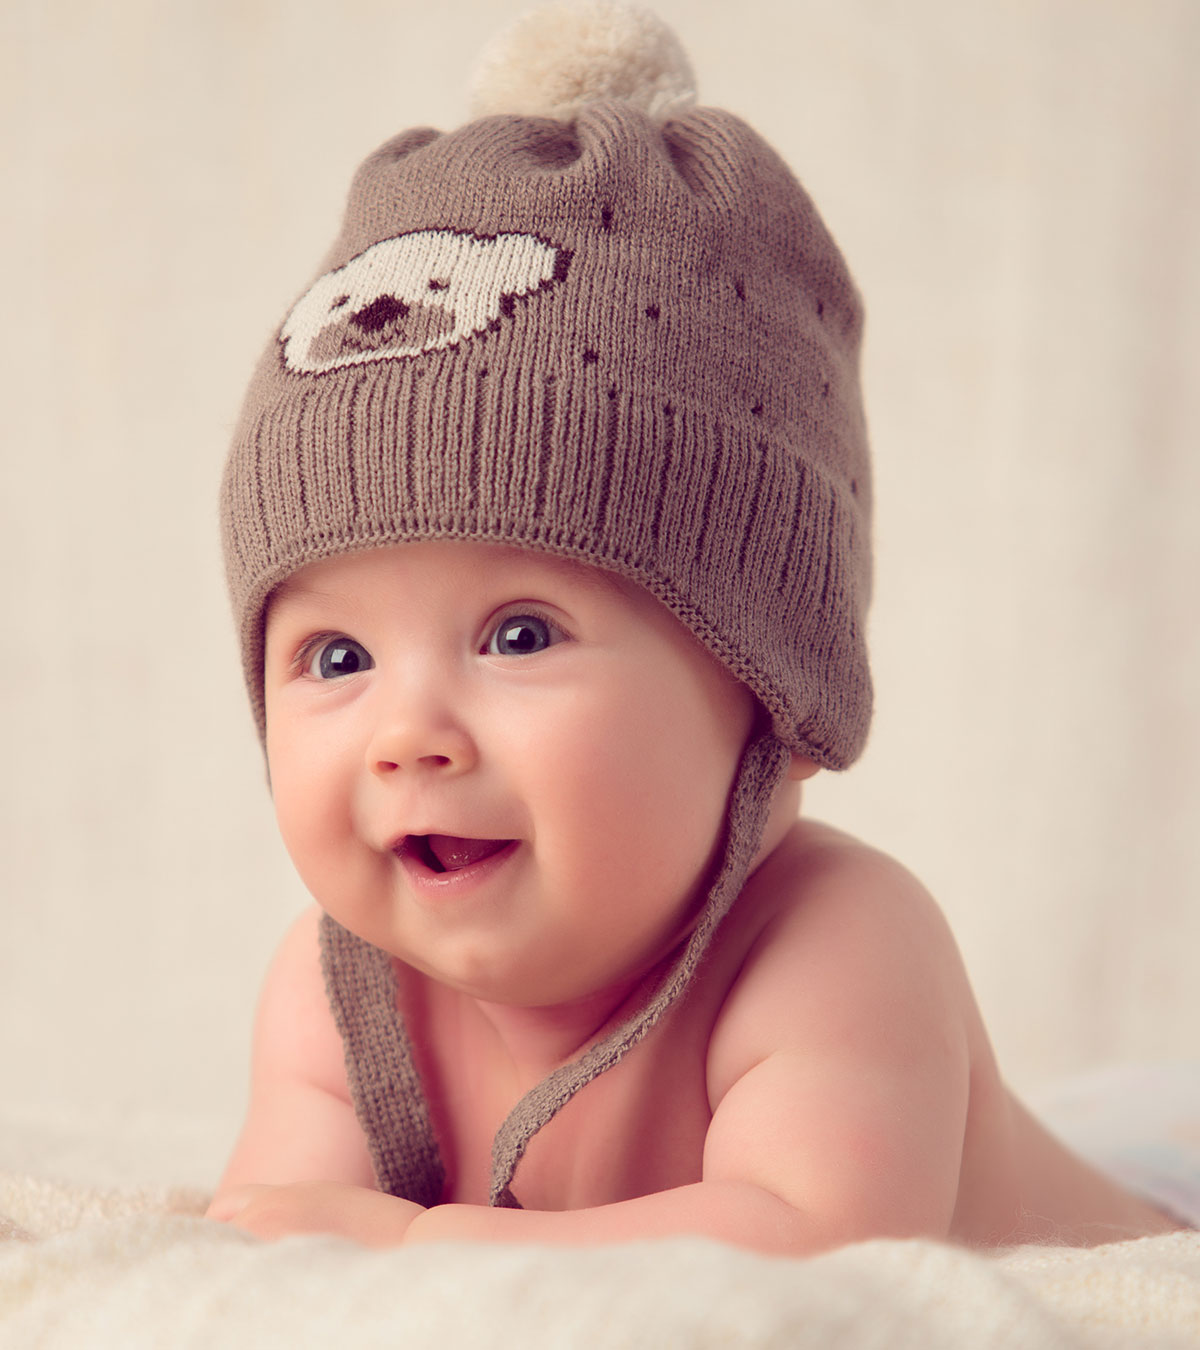 Top 999+ stylish baby boy images – Amazing Collection stylish baby boy images Full 4K